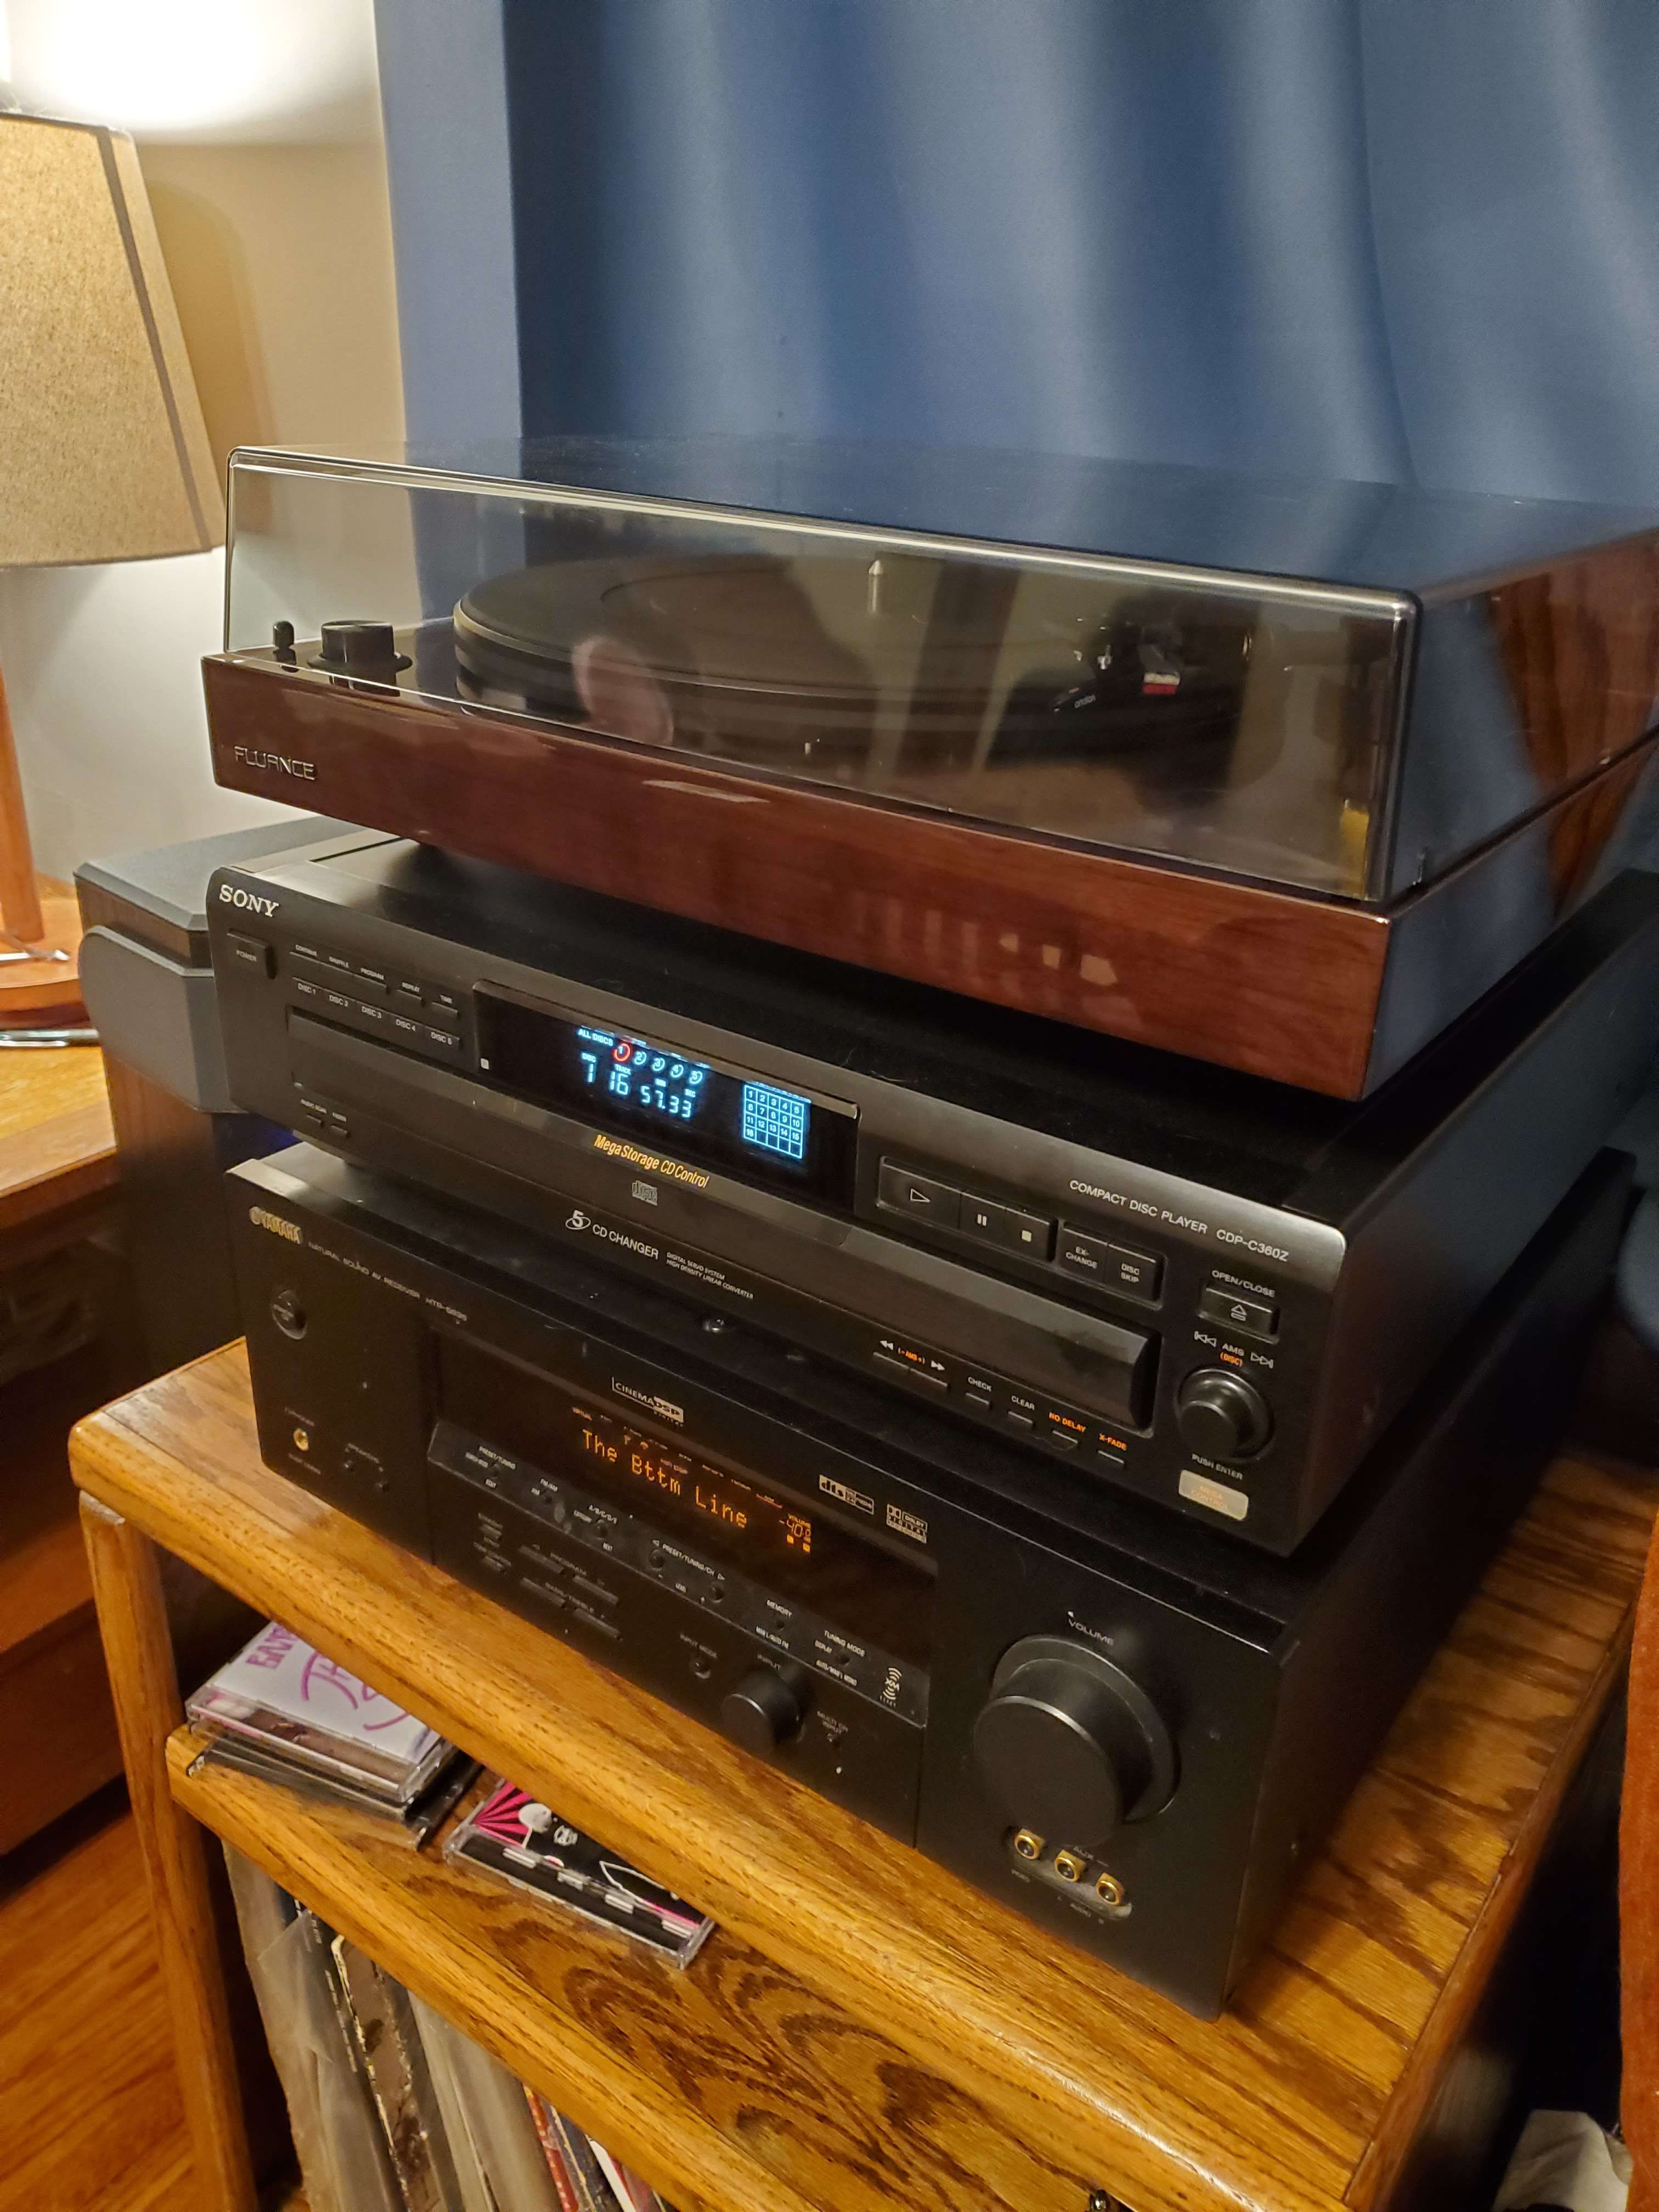 stack of three pieces of audio equipment. from bottom to top, a yamaha amplifier, a sony 5-disc cd player, and a fluance turntable with a dust cover.